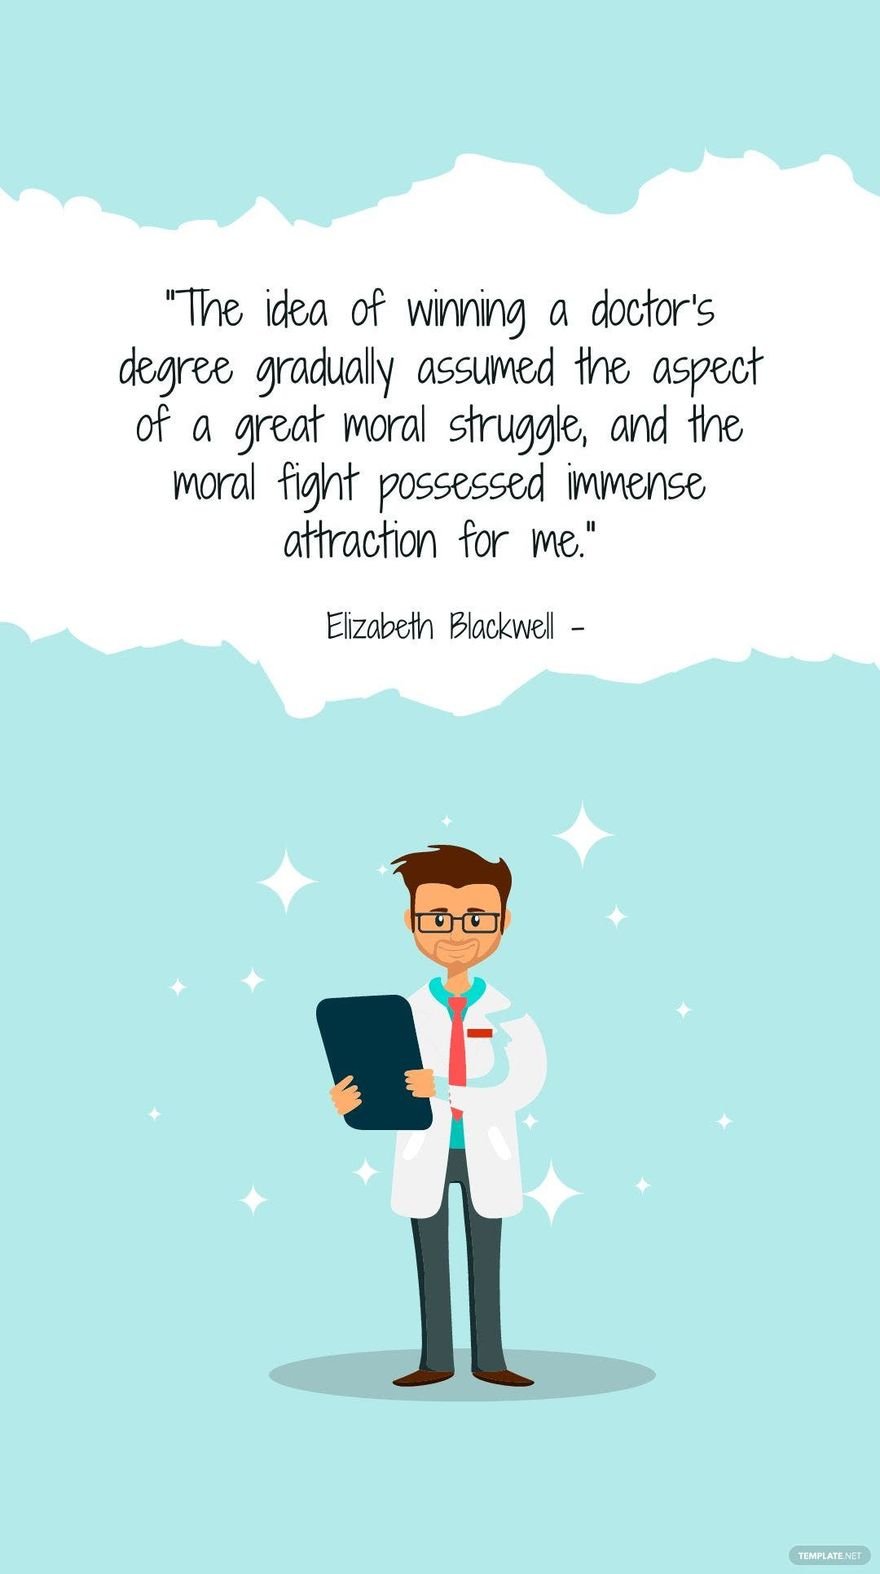 Elizabeth Blackwell - The idea of winning a doctor's degree gradually assumed the aspect of a great moral struggle, and the moral fight possessed immense attraction for me. in JPG